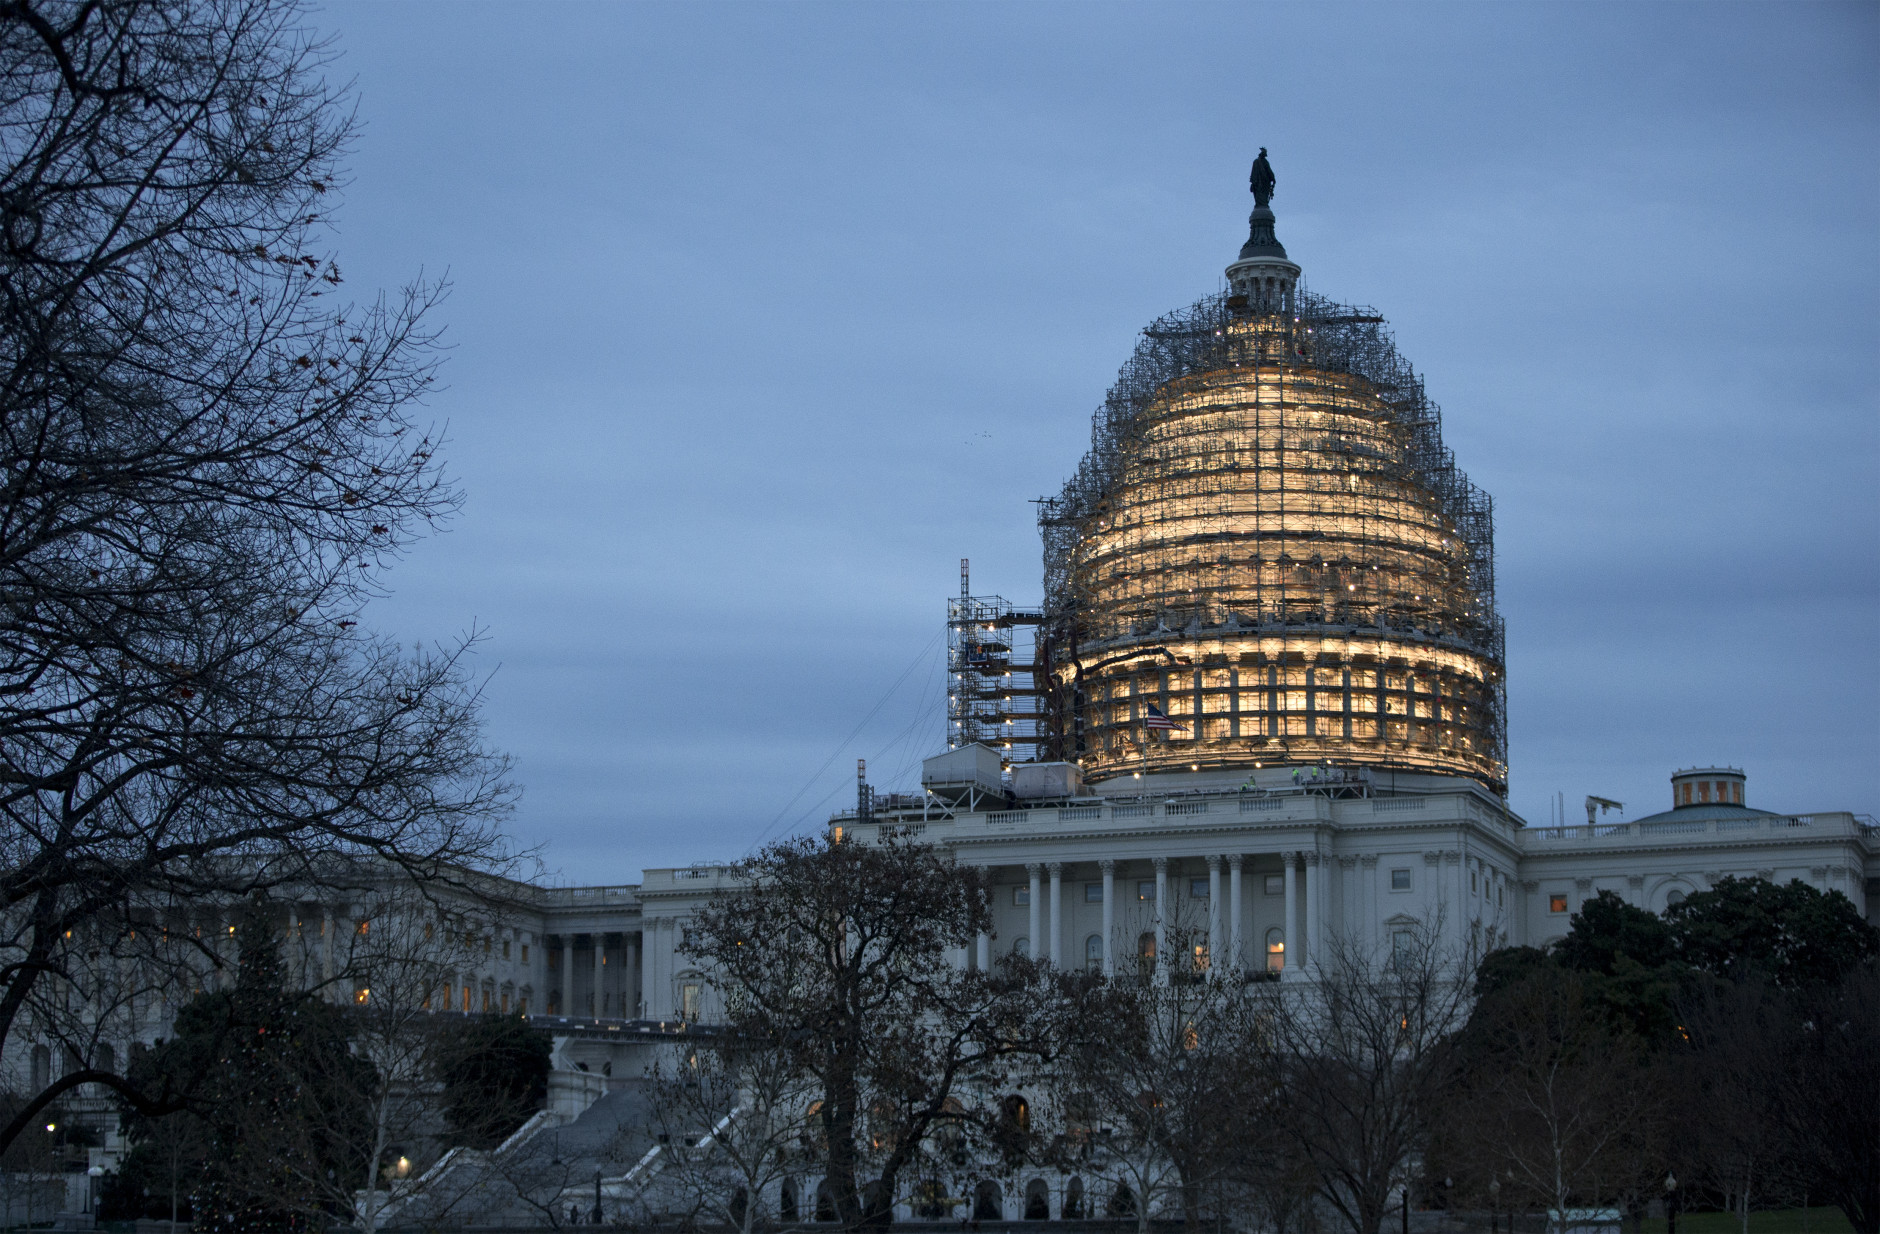 The Capitol Dome is illuminated amid scaffolding for repairs in Washington, Friday morning, Dec. 18, 2015.  The House and Senate race to wrap up votes on a massive spending and tax package, which President Barack Obama promises to sign.  (AP Photo/J. Scott Applewhite)